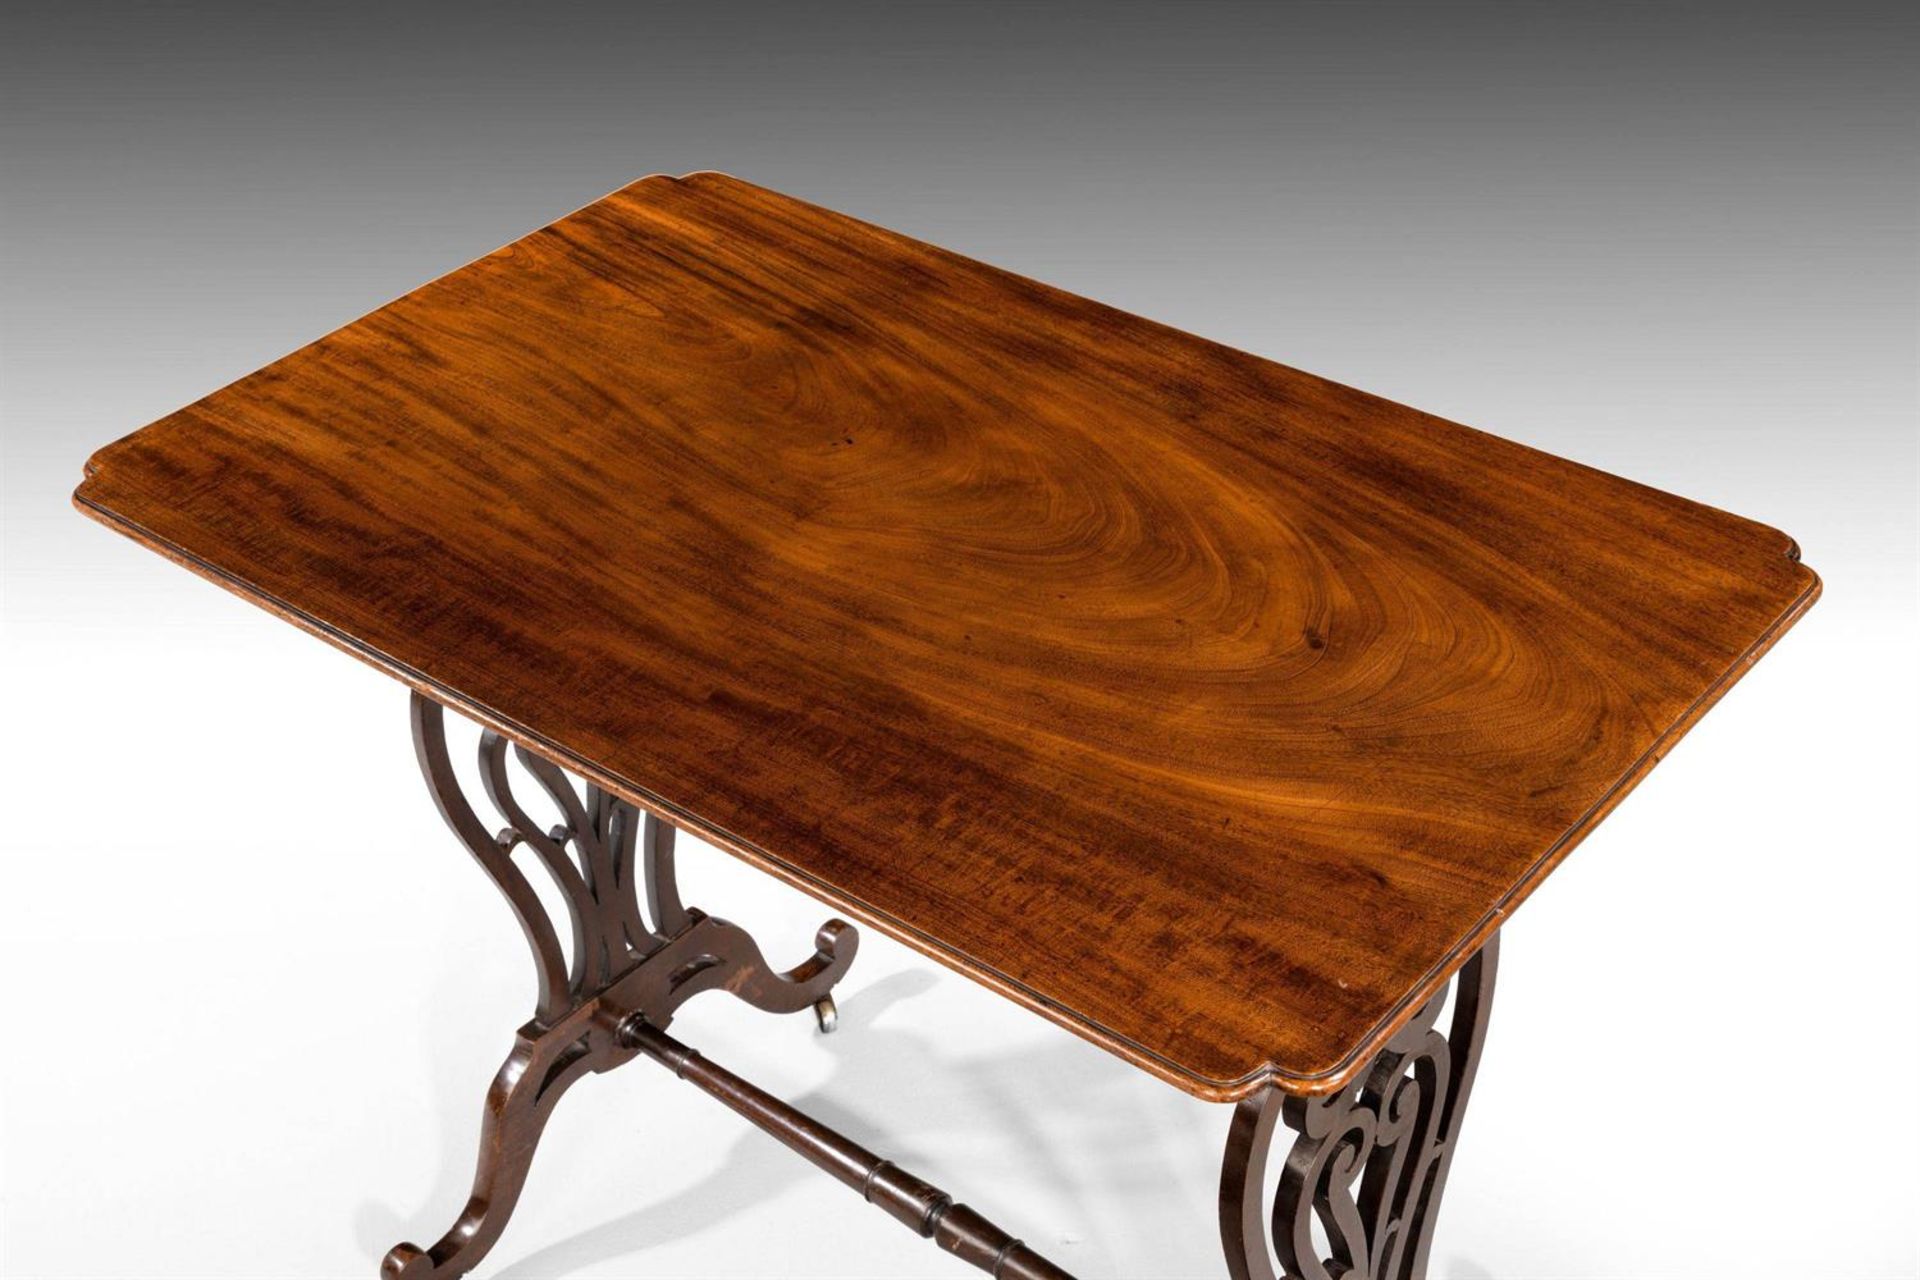 A GEORGE III MAHOGANY SIDE OR WRITING TABLE, LATE 18TH CENTURY - Image 3 of 4